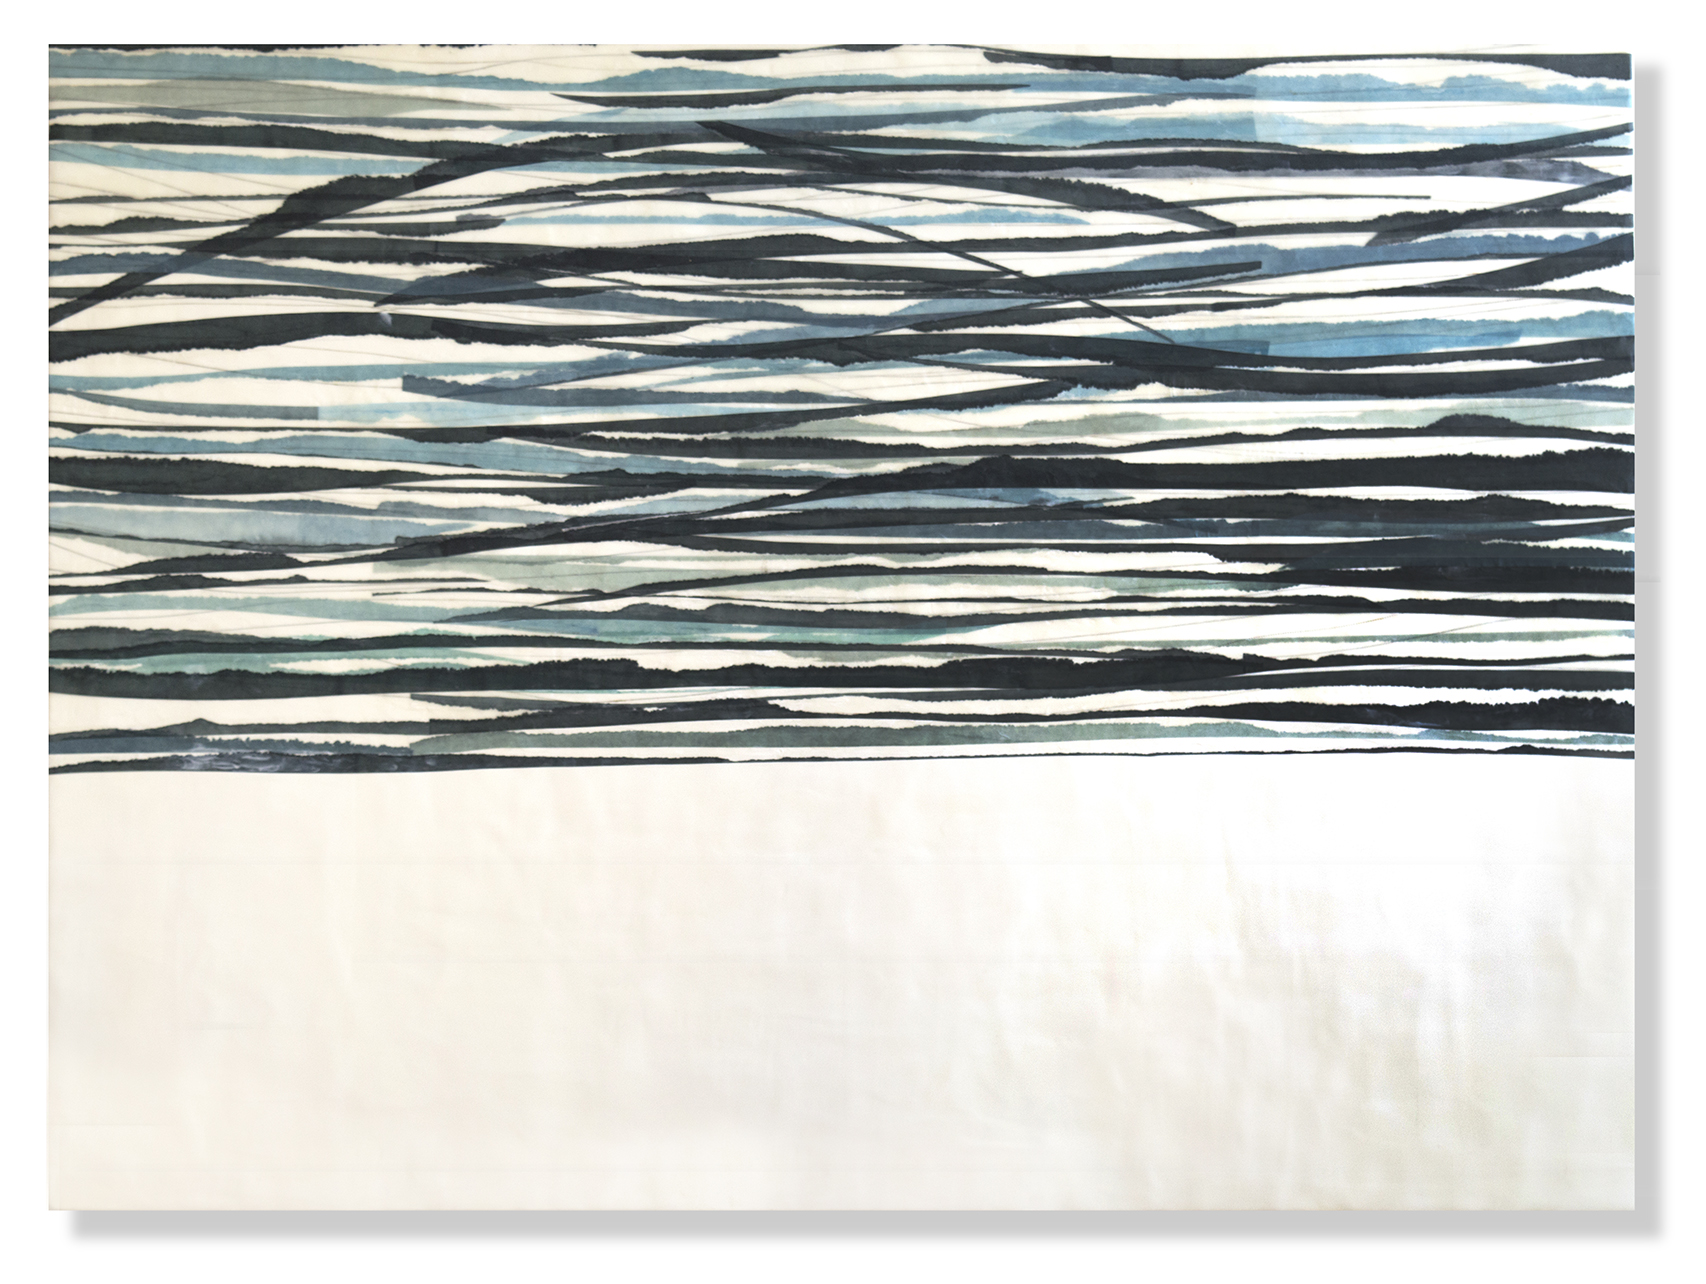  Swell 3, 2017 (sold) Encaustic, Mulberry paper, watercolor 3 x 4&nbsp;feet  The ocean is never far from my mind and is a constant source of inspiration. I often attempt to capture the ever-changing luminosity and movement of the ocean’s surface usin